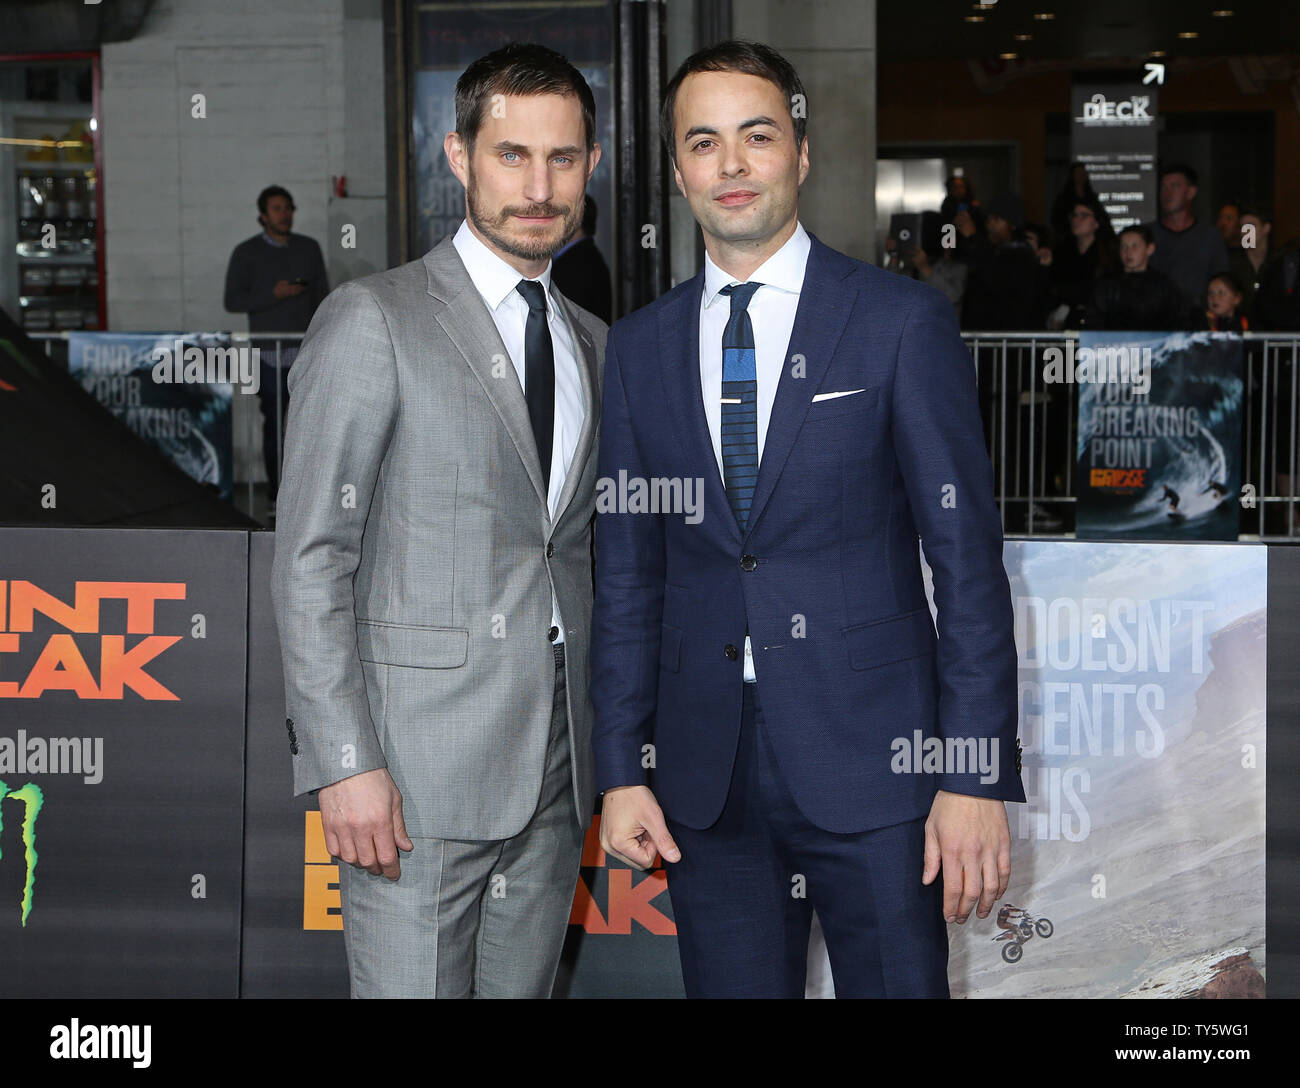 Clemens Schick (L) and Nikolai Kinski attend the premiere of the film 'Point Break' at the TCL Chinese Theatre in the Hollywood section of Los Angeles on December 15, 2015.   Photo by David Silpa/UPI Stock Photo